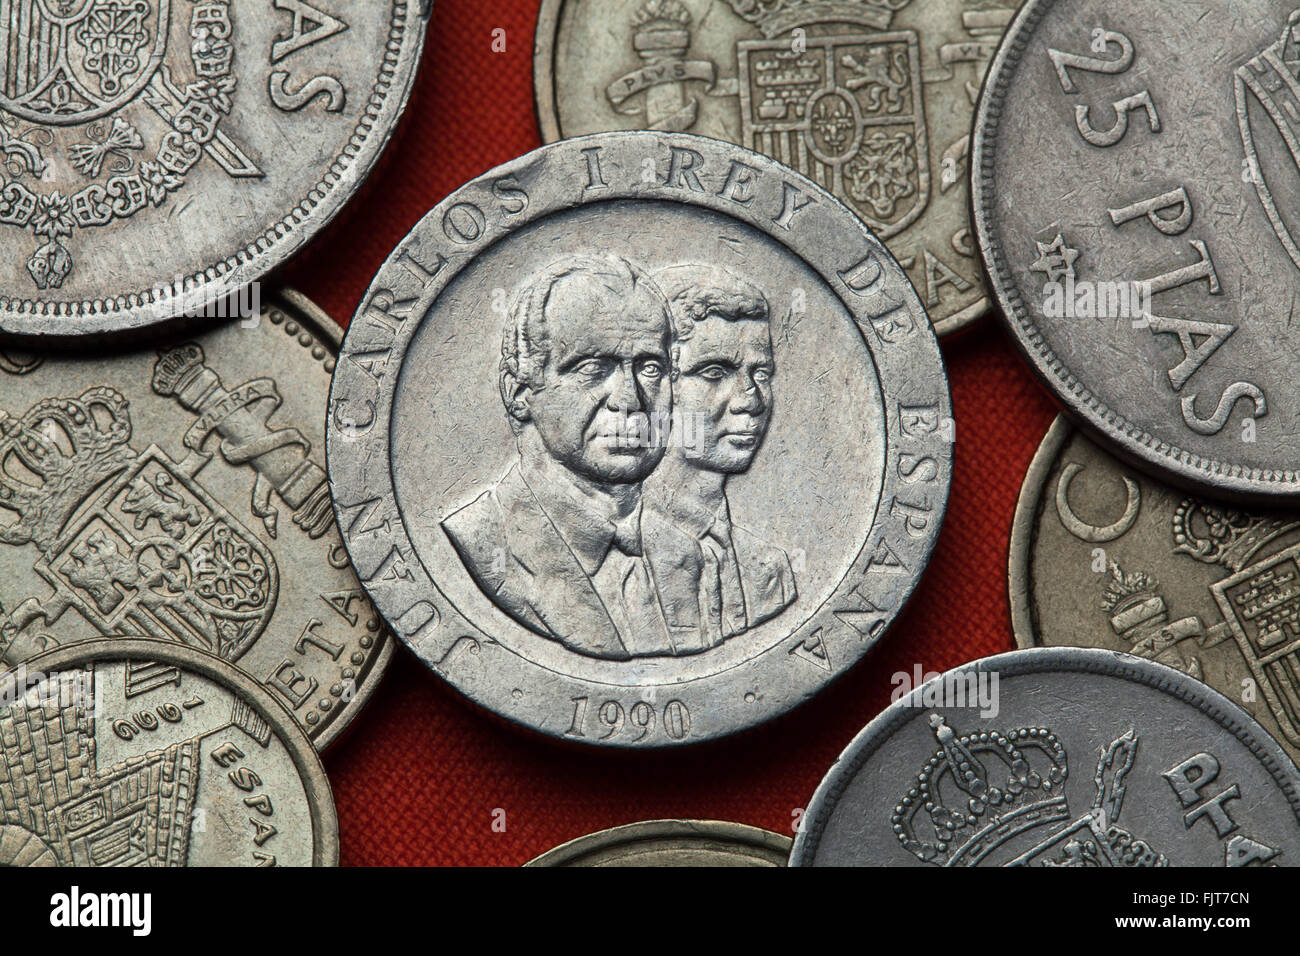 Coins of Spain. King Juan Carlos I and Crown Prince Felipe of Spain depicted in the Spanish 200 peseta coin (1990). Stock Photo